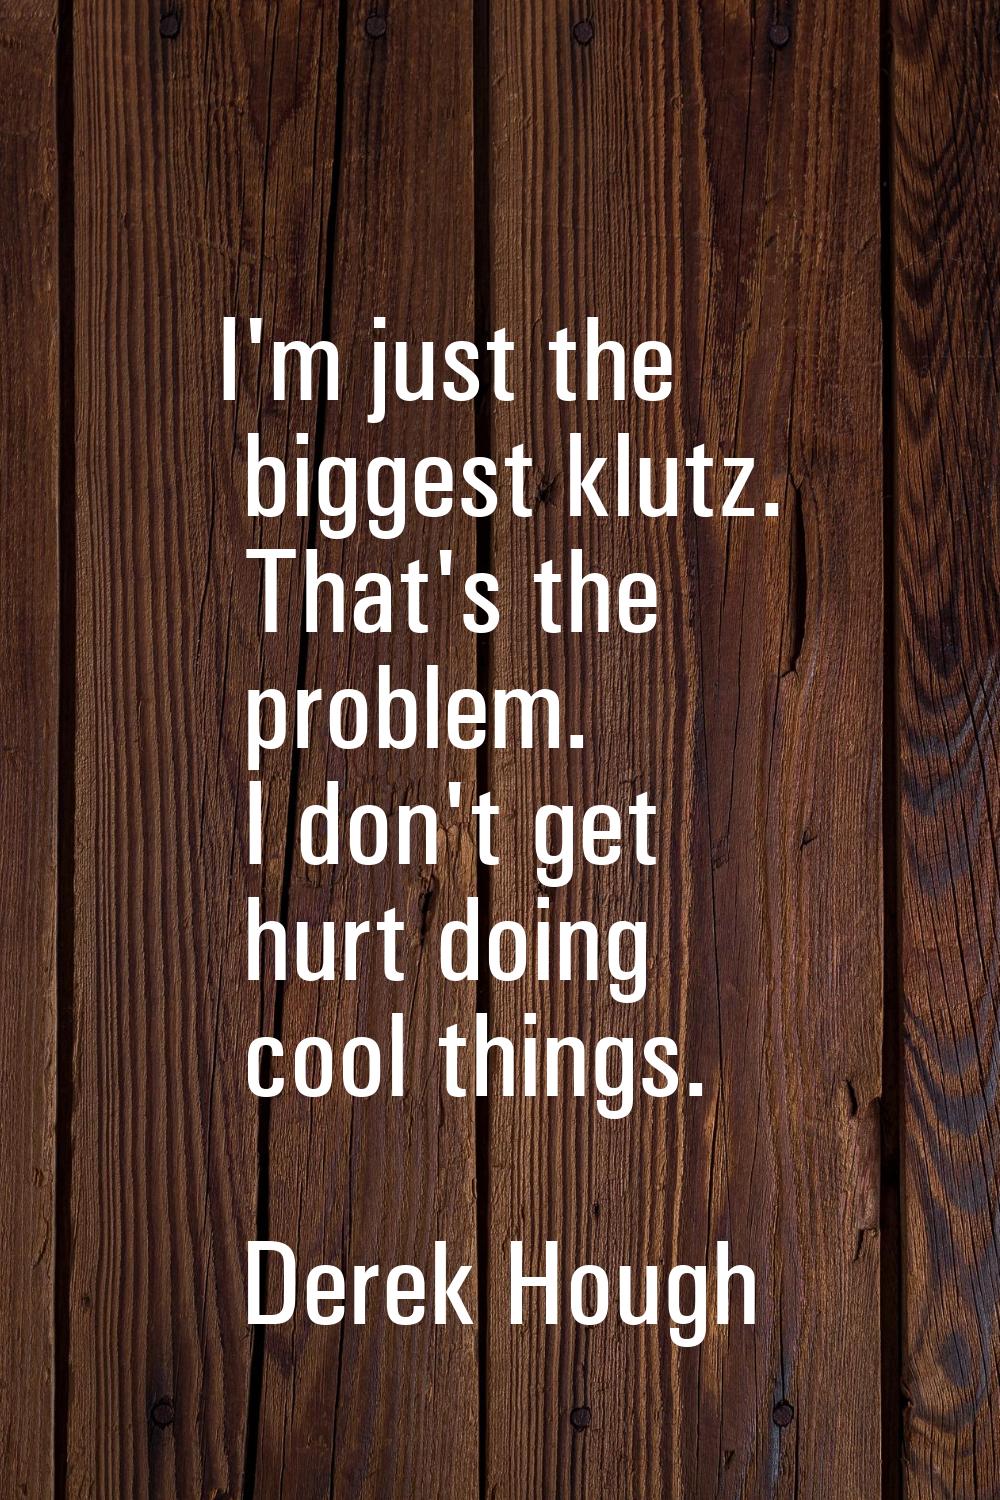 I'm just the biggest klutz. That's the problem. I don't get hurt doing cool things.